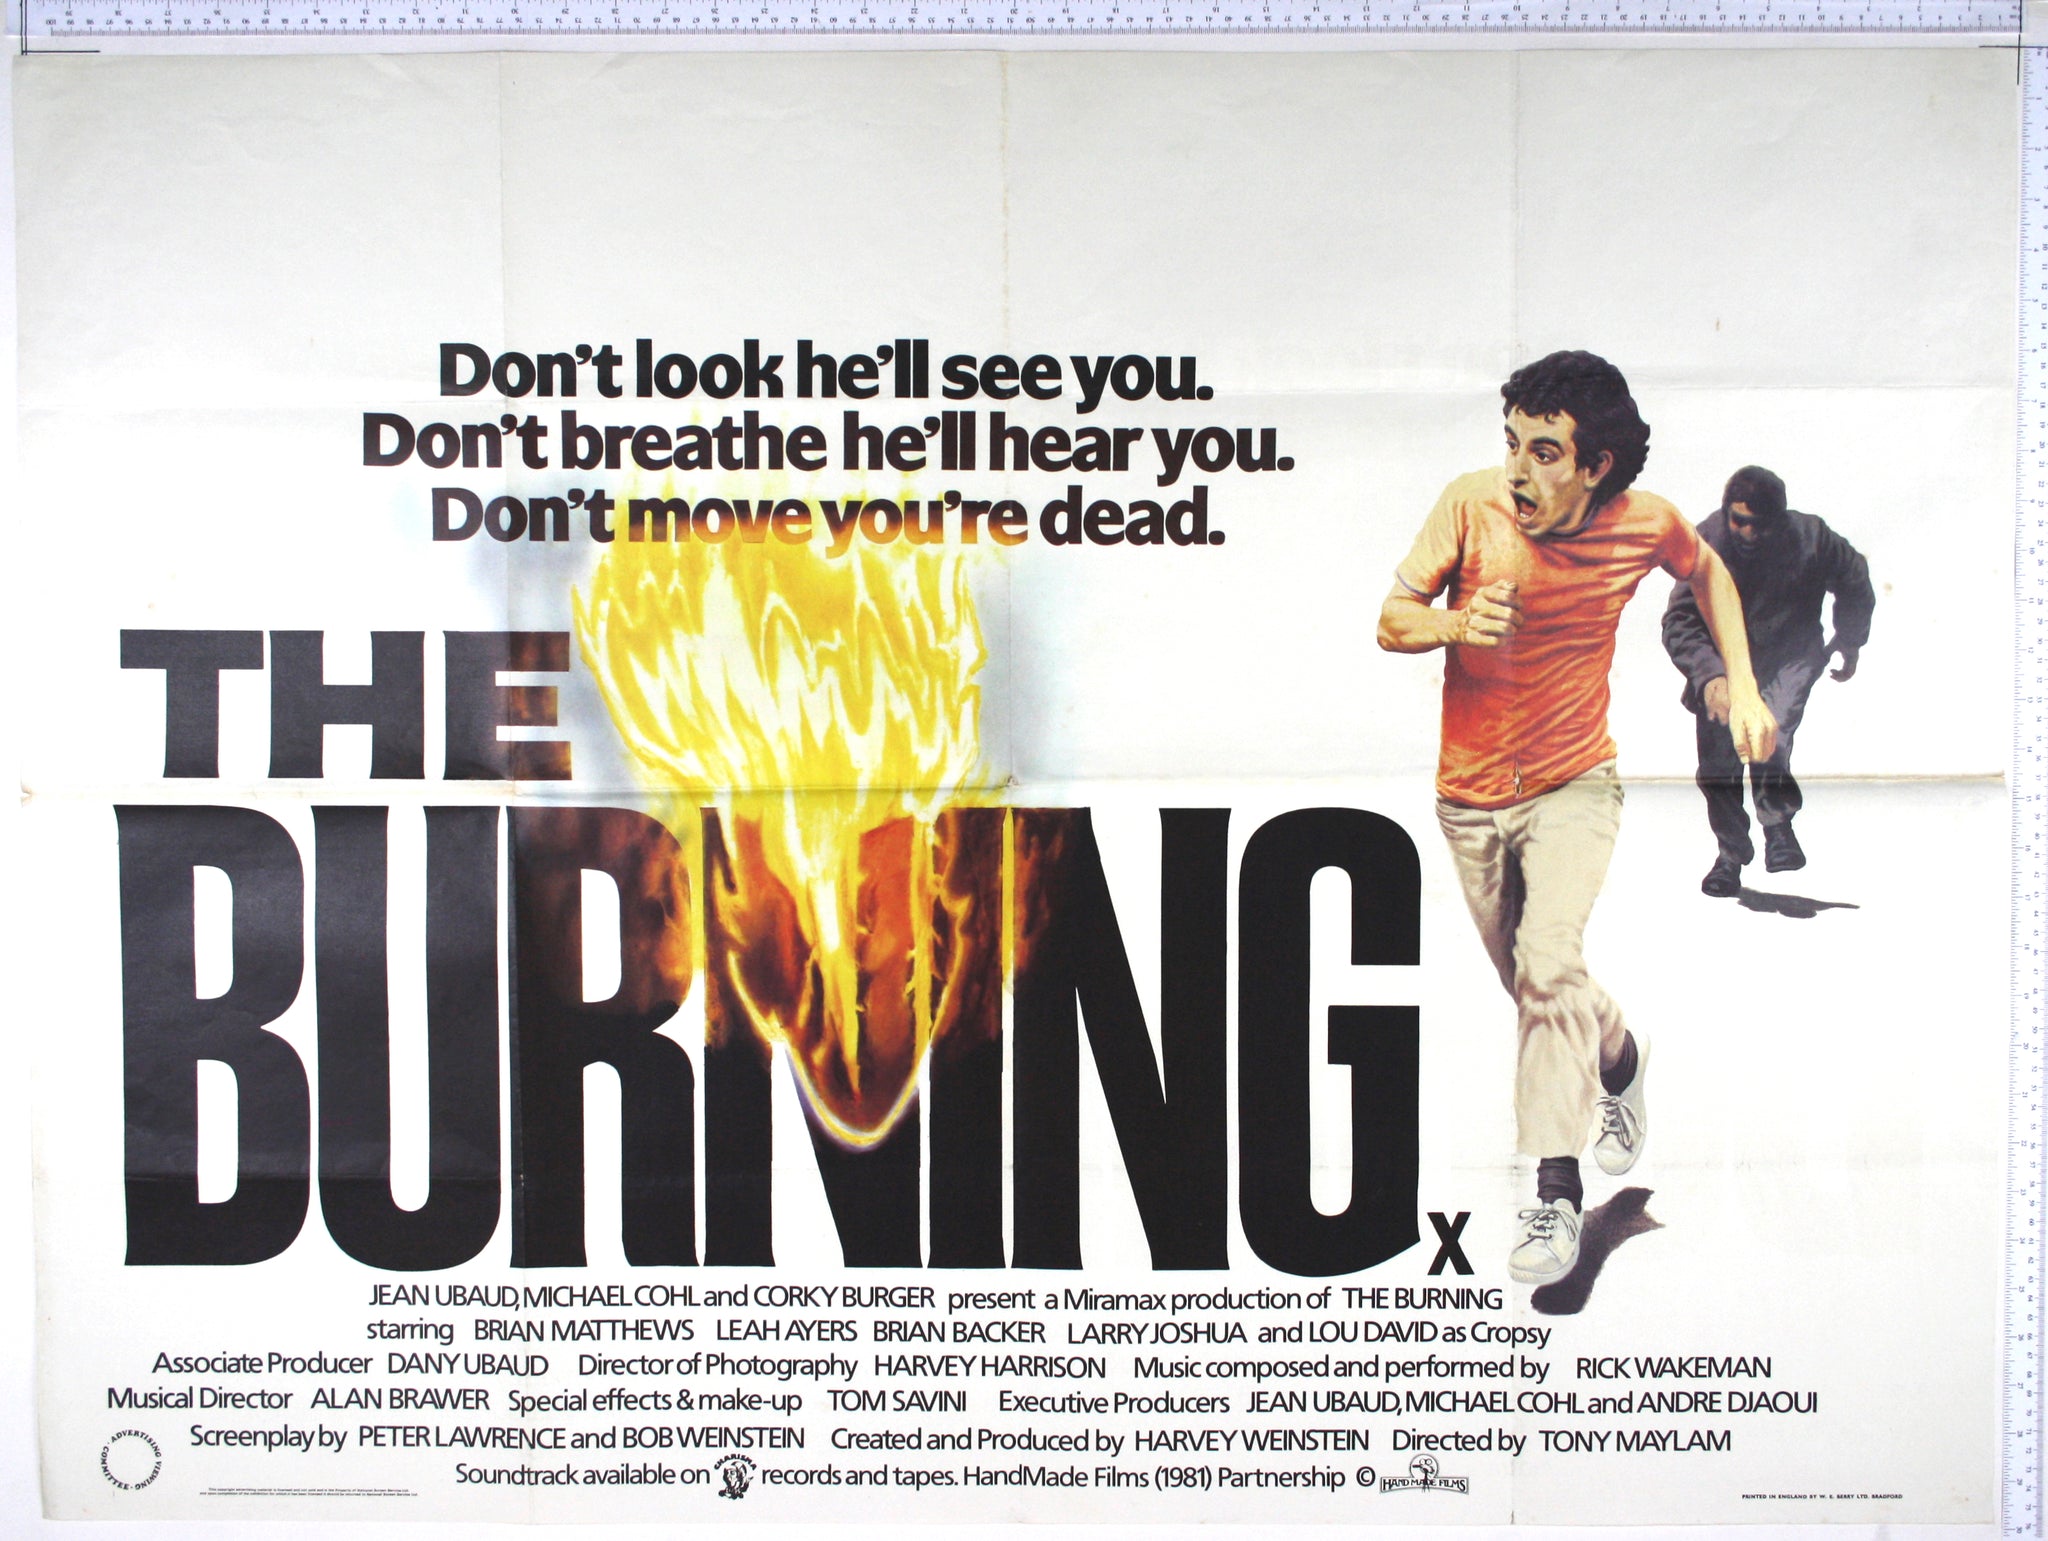 At right a boy in T Shirt running terrified from a shadowy figure, with The Burning title to left and centre beginning to burst into flames.